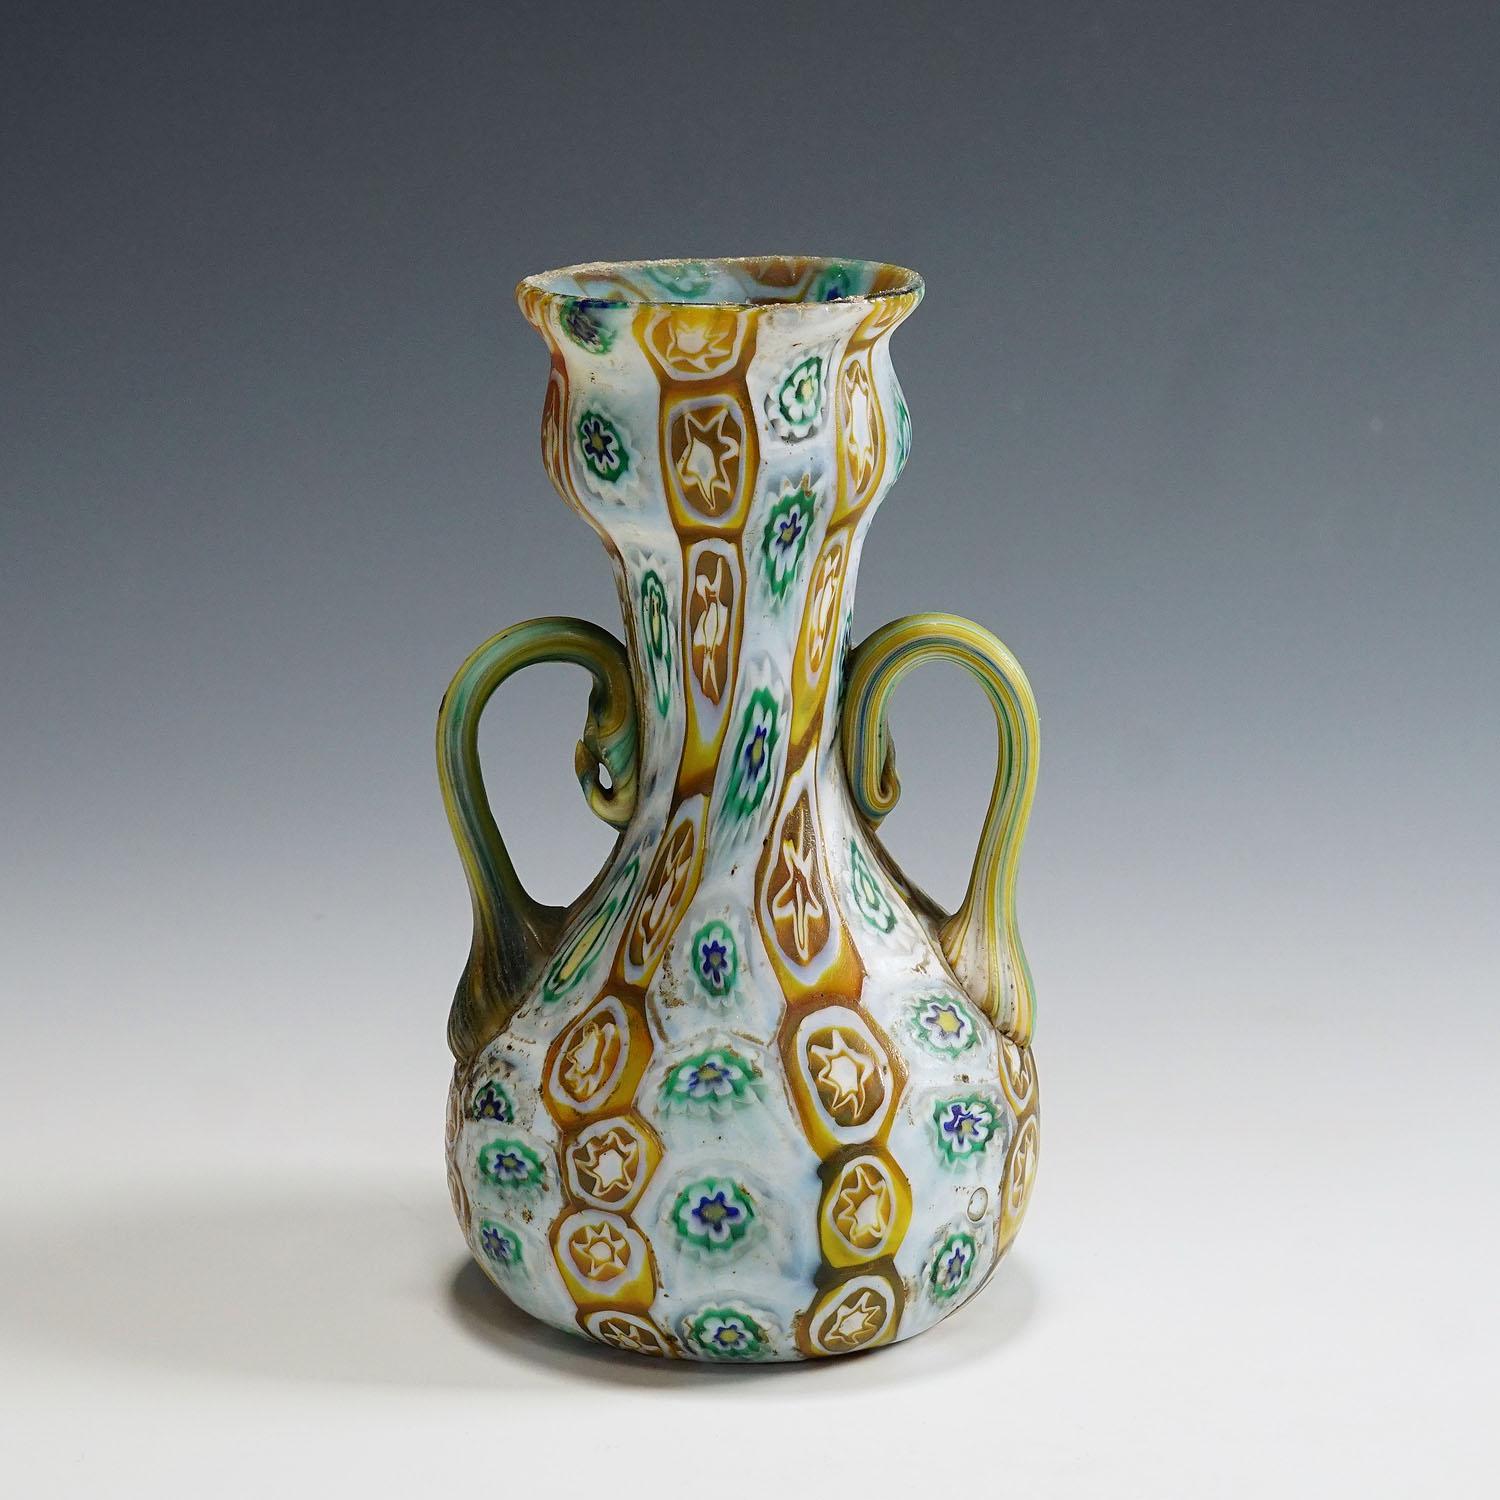 Antique Millefiori Vase in Brown, Green and White, Fratelli Toso Murano 1910

An antique Millefiori murrine glass vase manufactured by Vetreria Fratelli Toso, Murano around 1910. Made of melted polychrome murrines in light brown, green, and white.